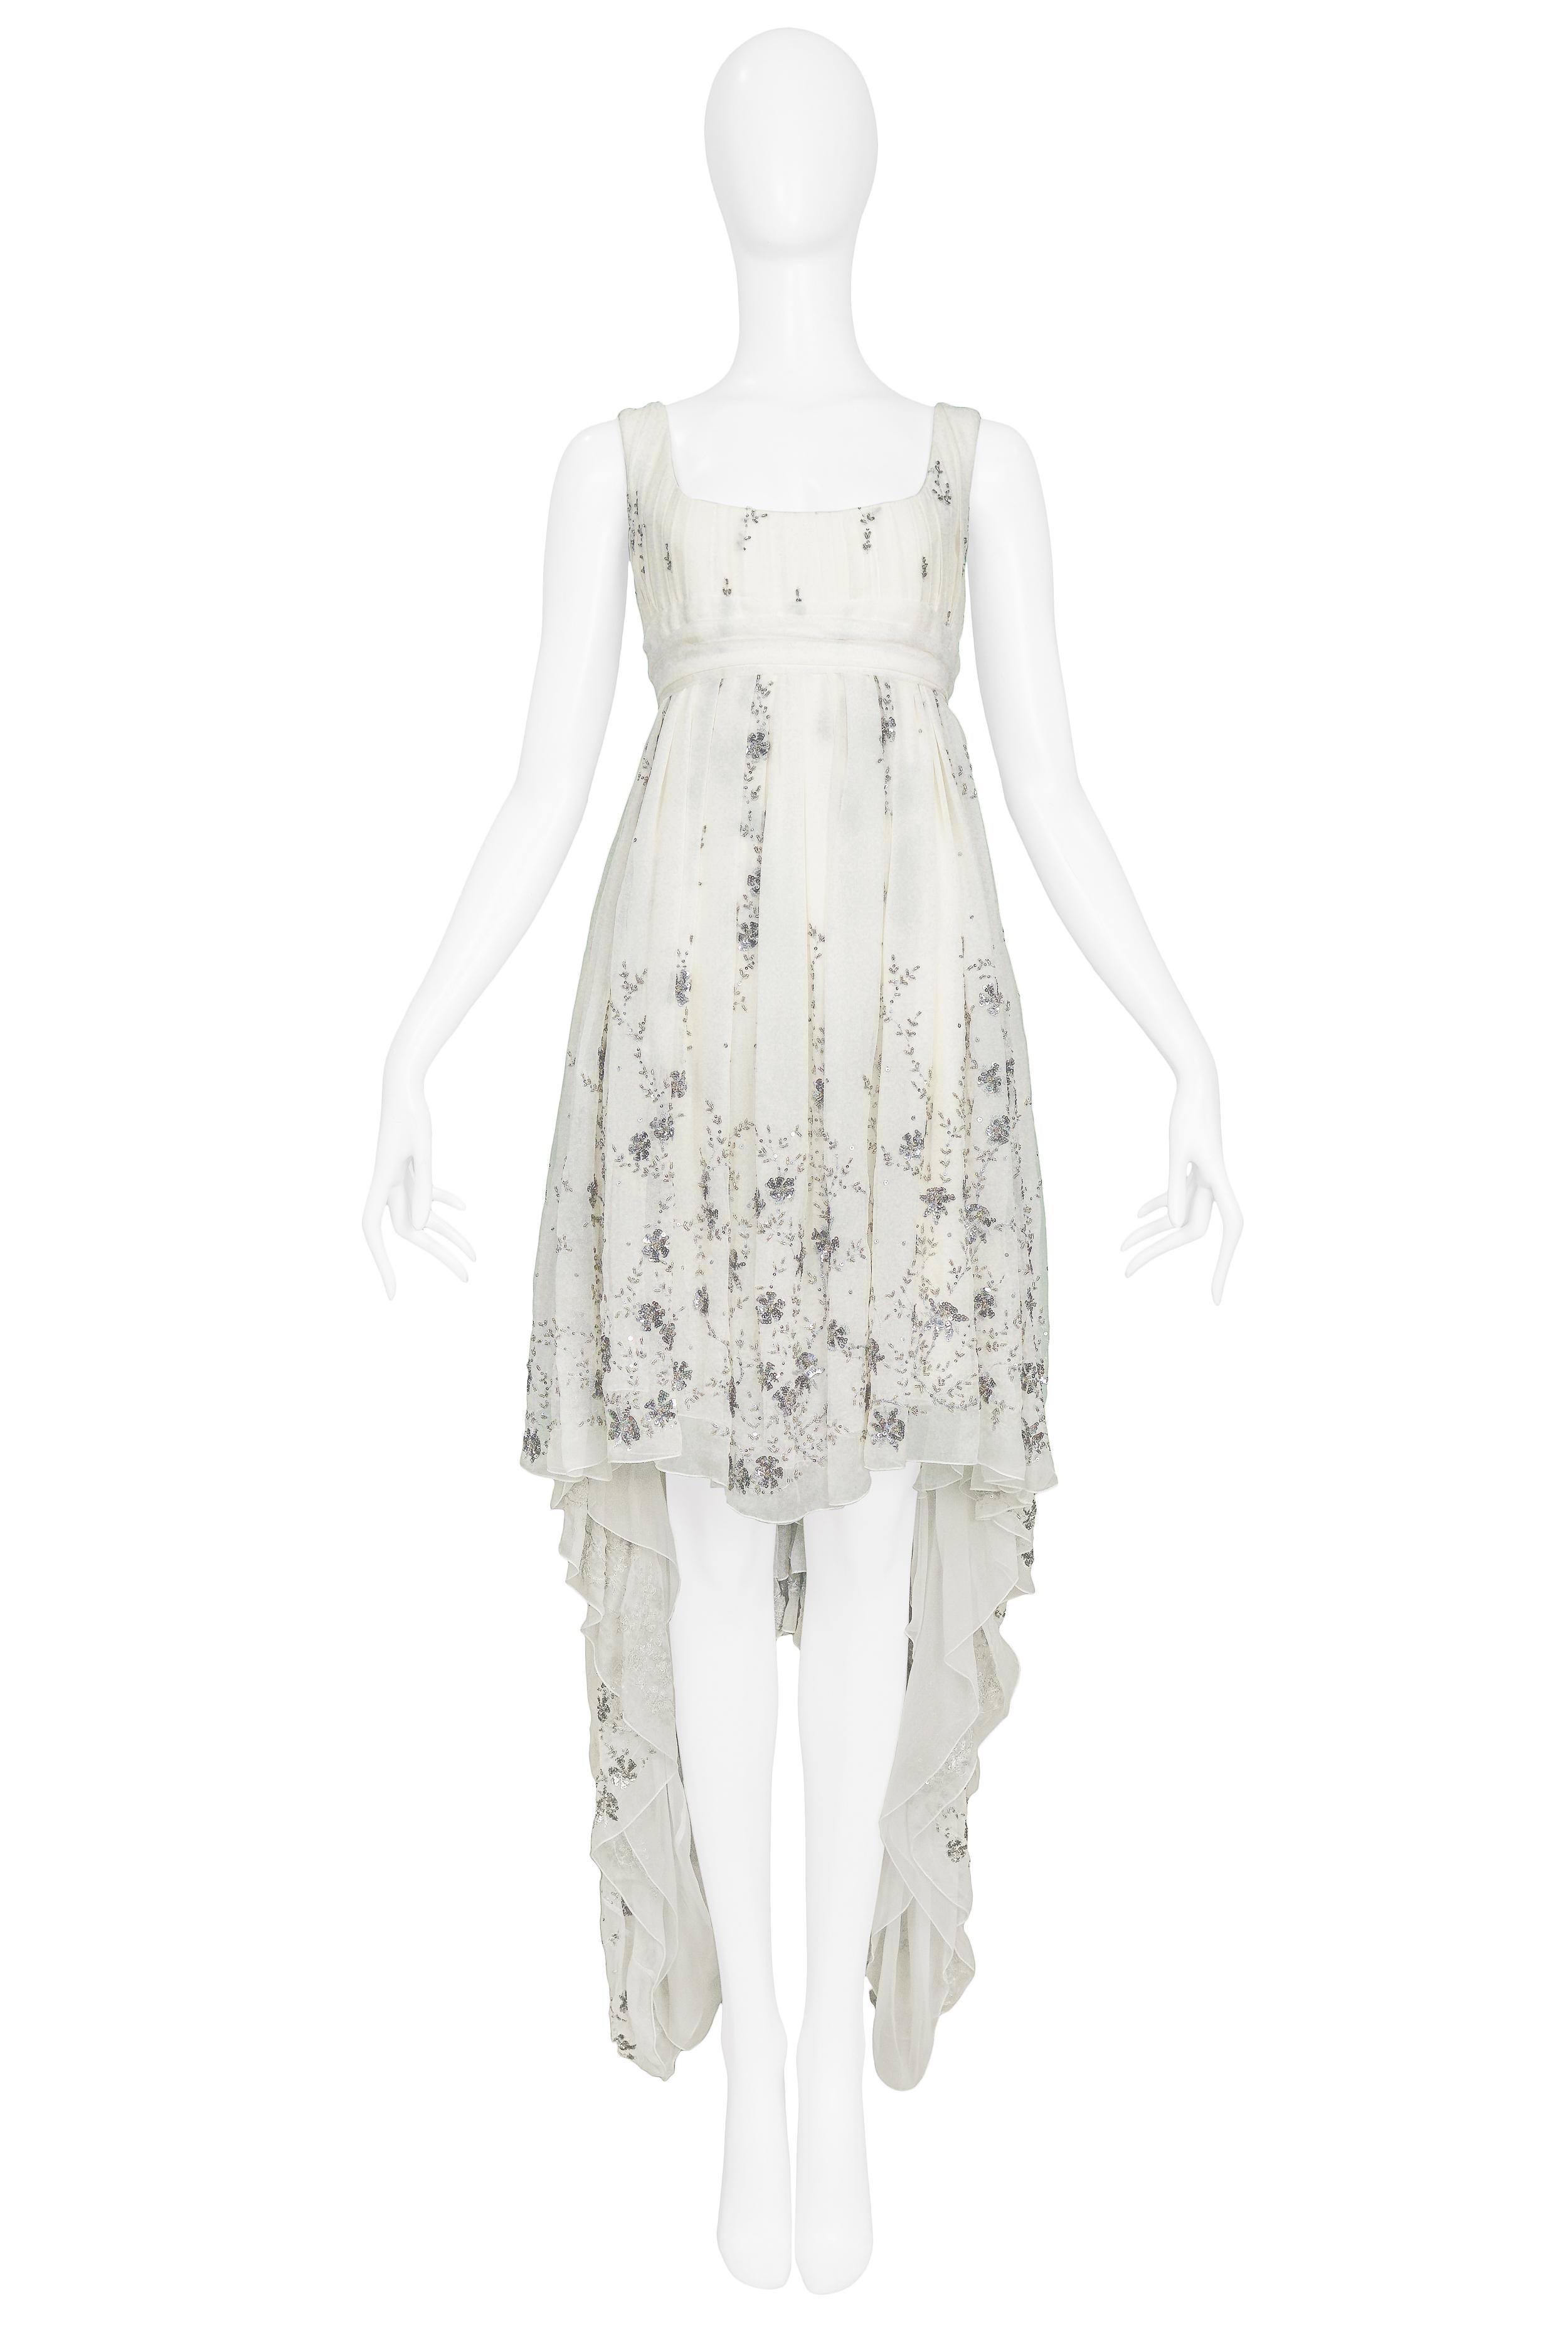 Vintage Alexander McQueen ivory chiffon empire gown with silver tone chain, bead & sequin floral embelishments. The gown features an asymmetrical hankerchief hem and a built in sash that ties in the back. Featured on the Autumn/Winter 2003